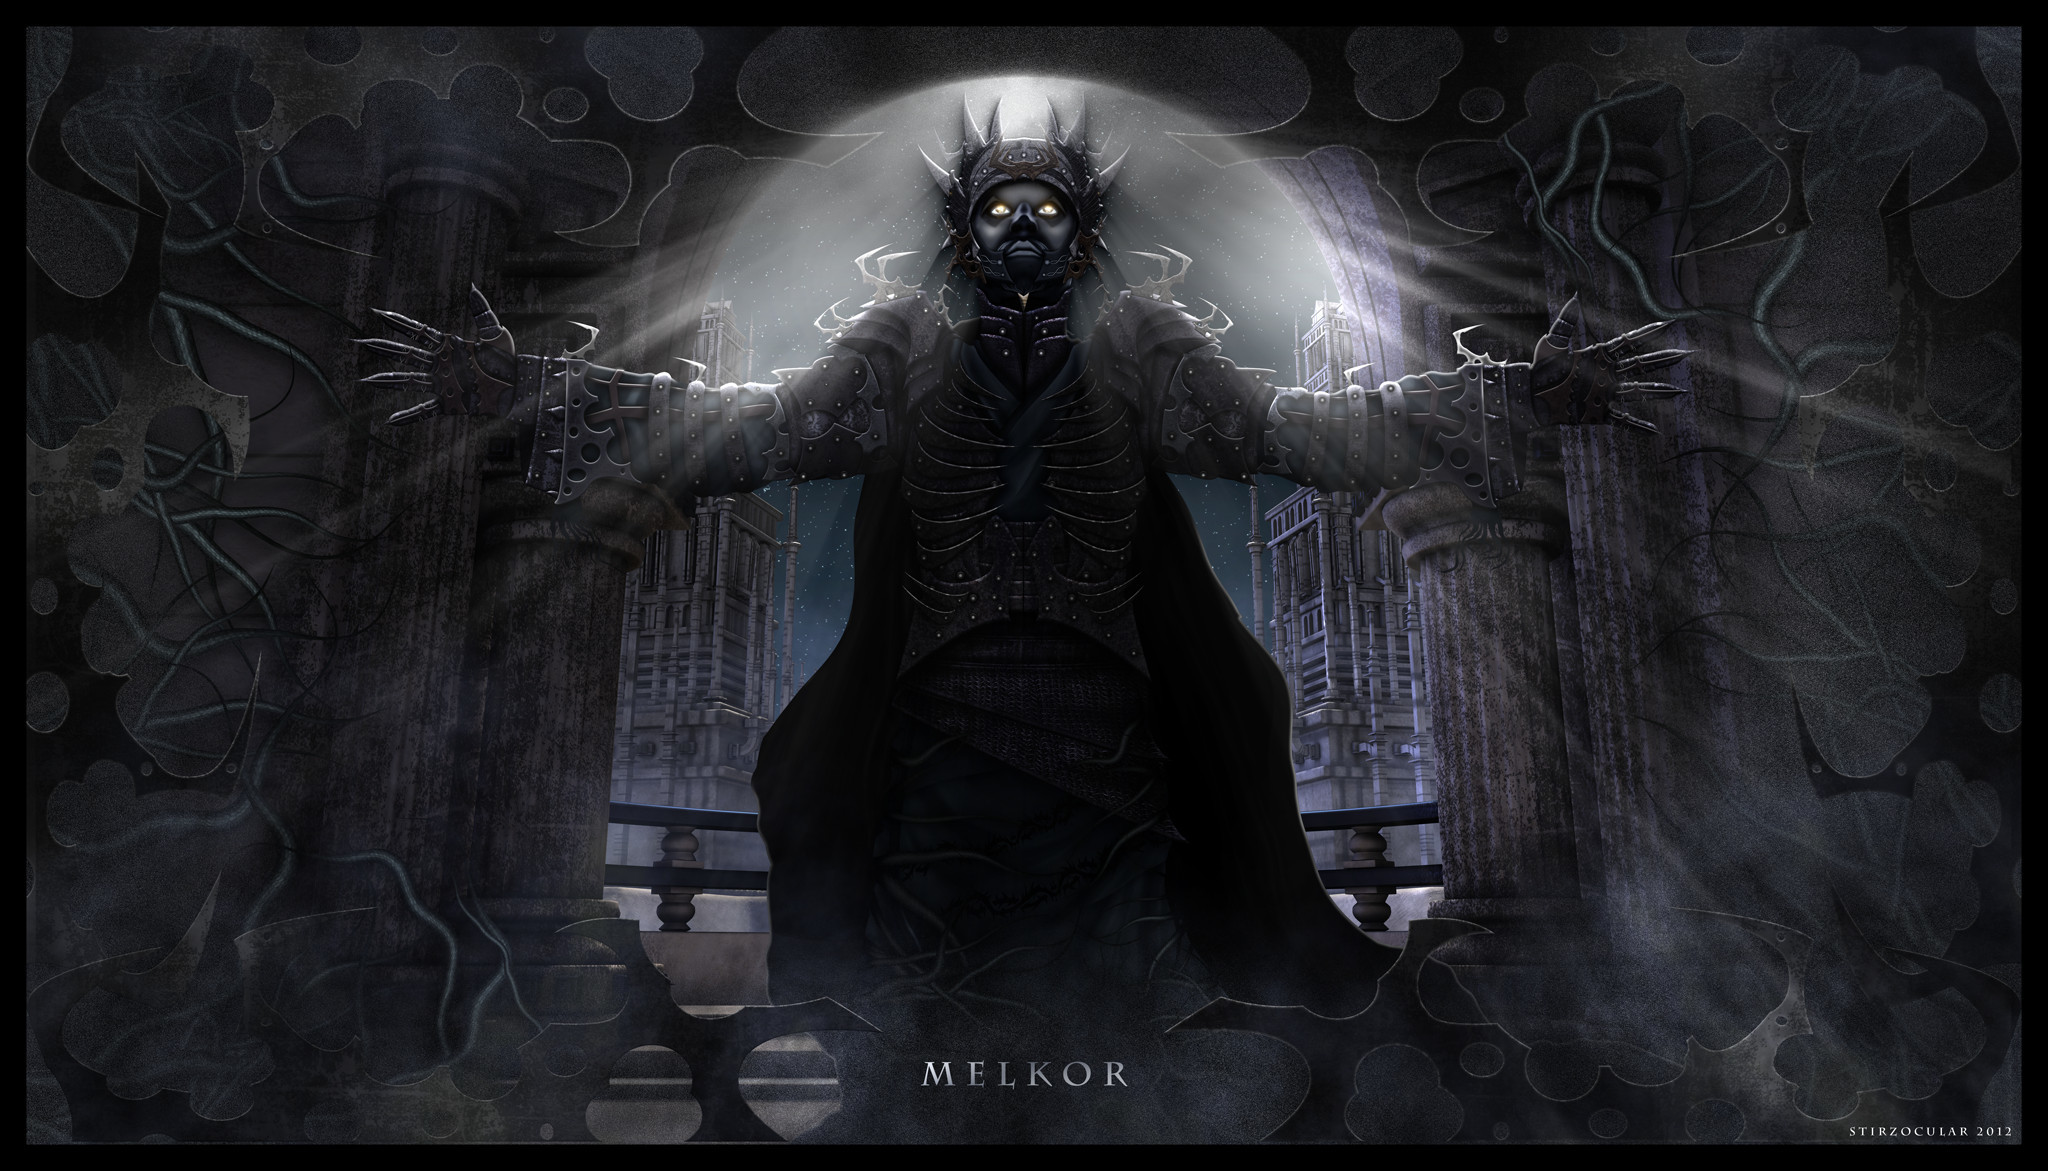 2048x1171 Melkor Unchained by Stirzocular Melkor Unchained by Stirzocular